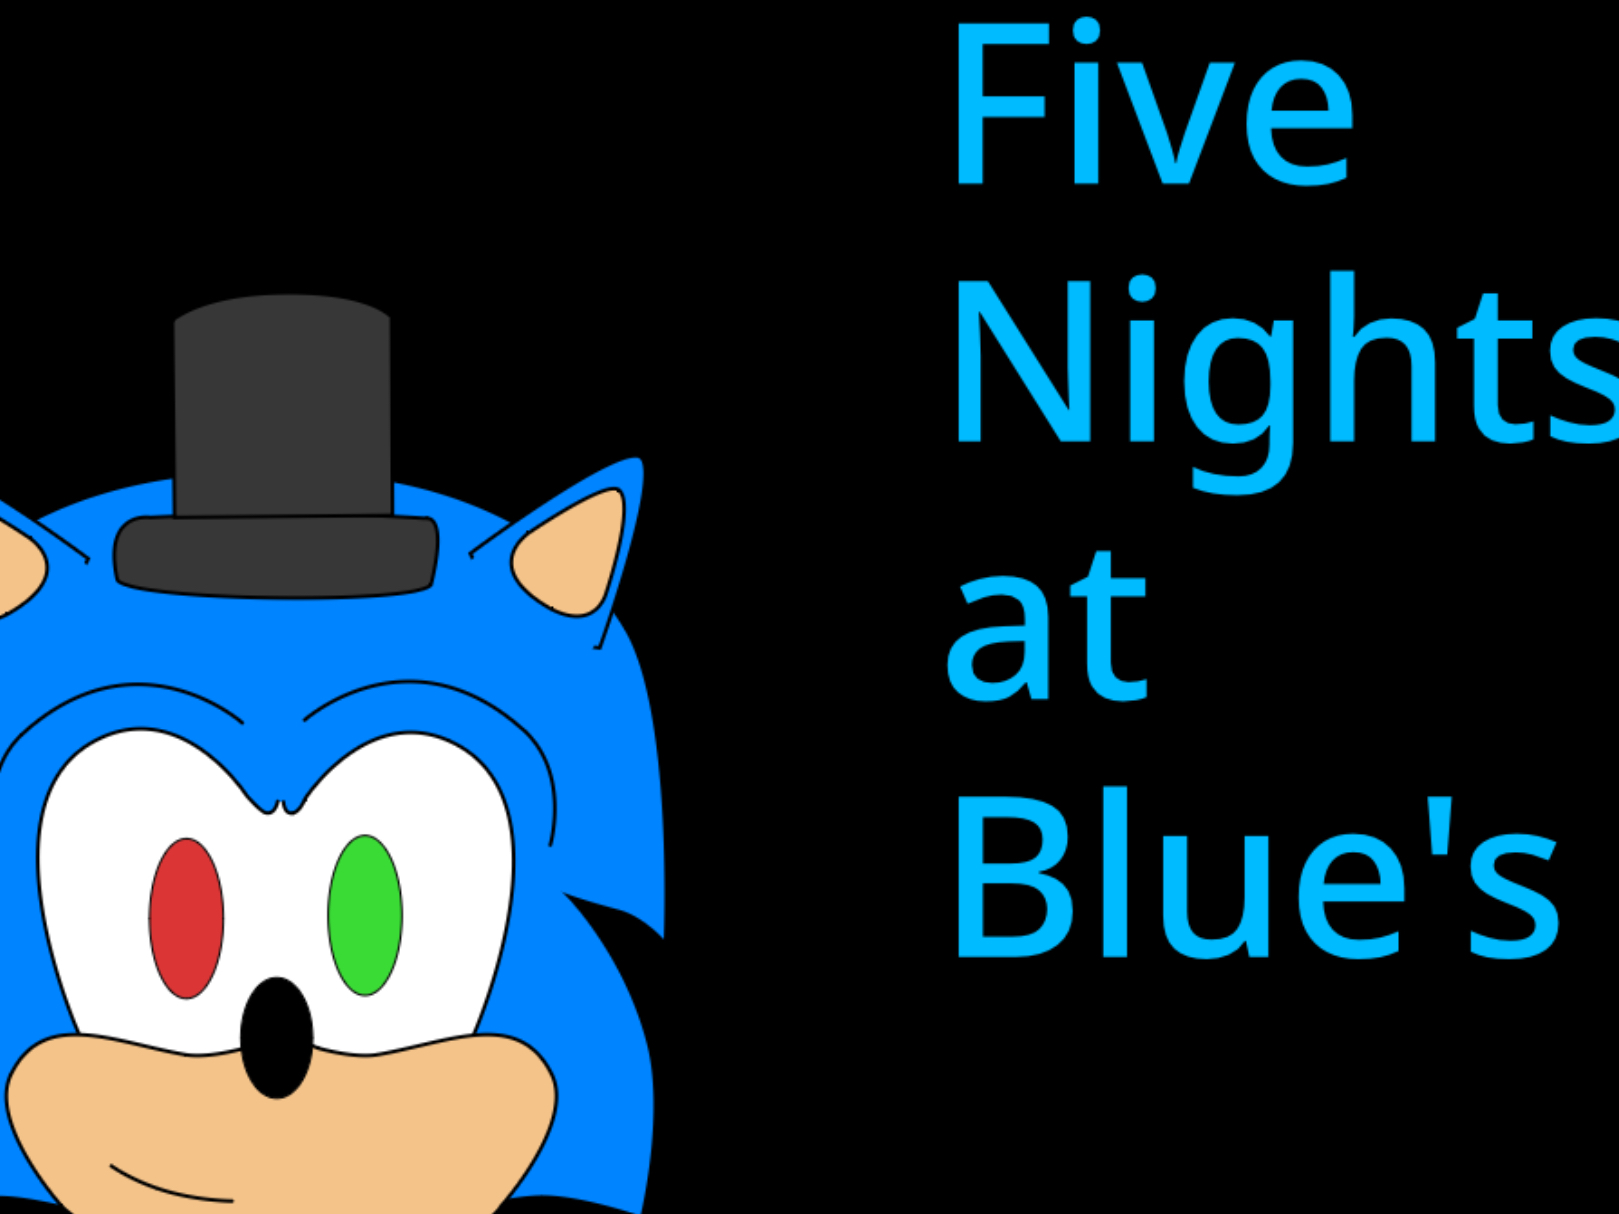 Five Nights at Blue’s